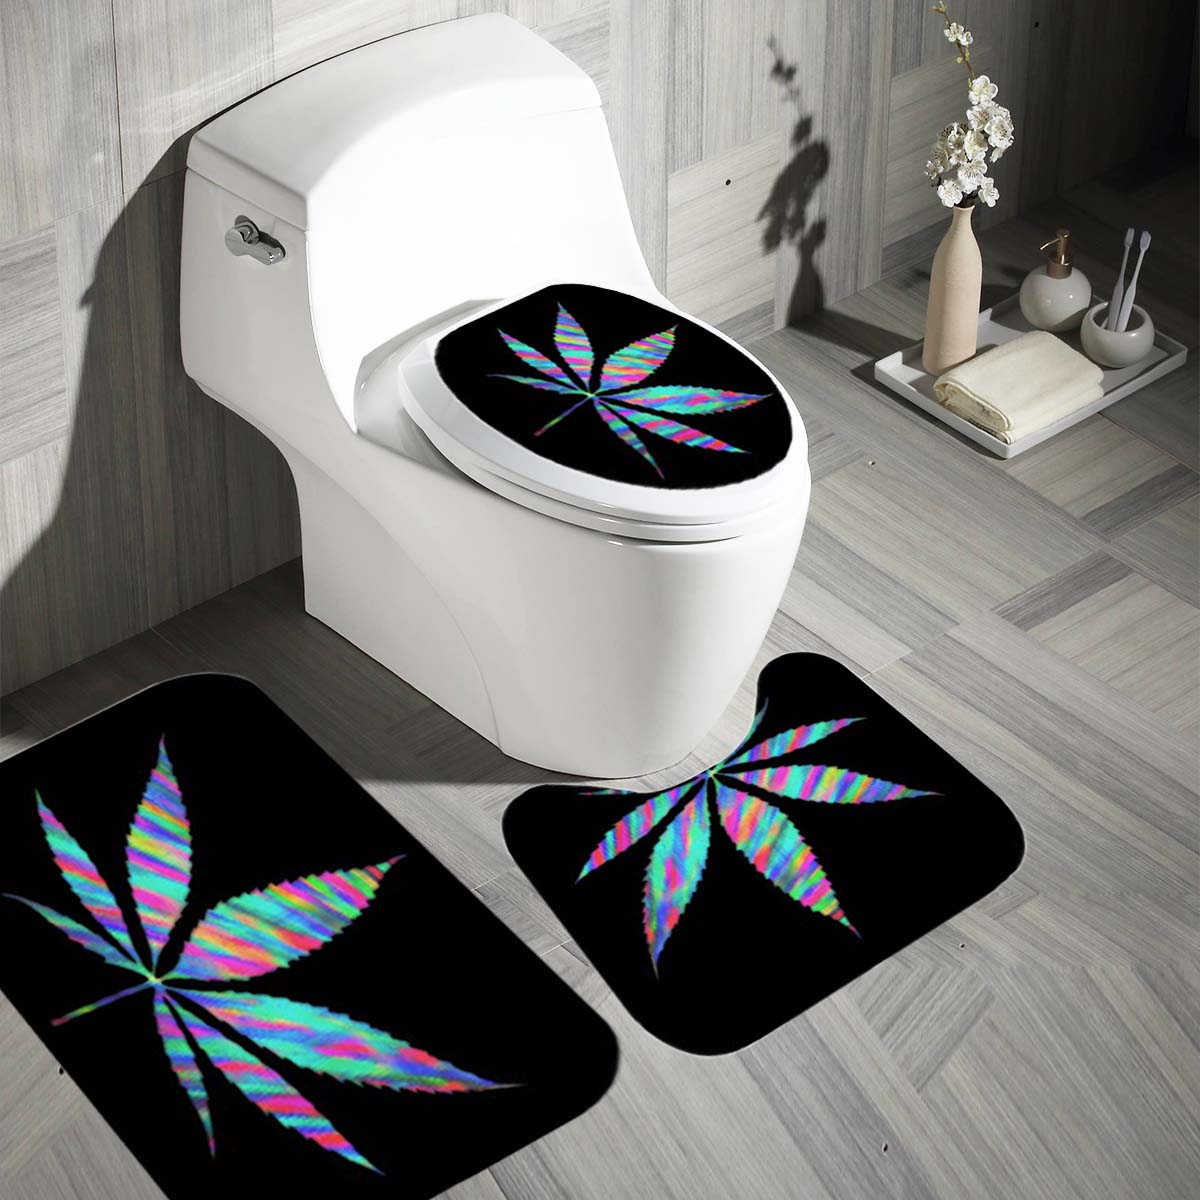 Find Bakeey Plant Leaves Printed Curtain For Bathroom Shower Anti slip Bath Mat Sets Toilet Cover Kitchen Carpet 4 piece Set for Sale on Gipsybee.com with cryptocurrencies